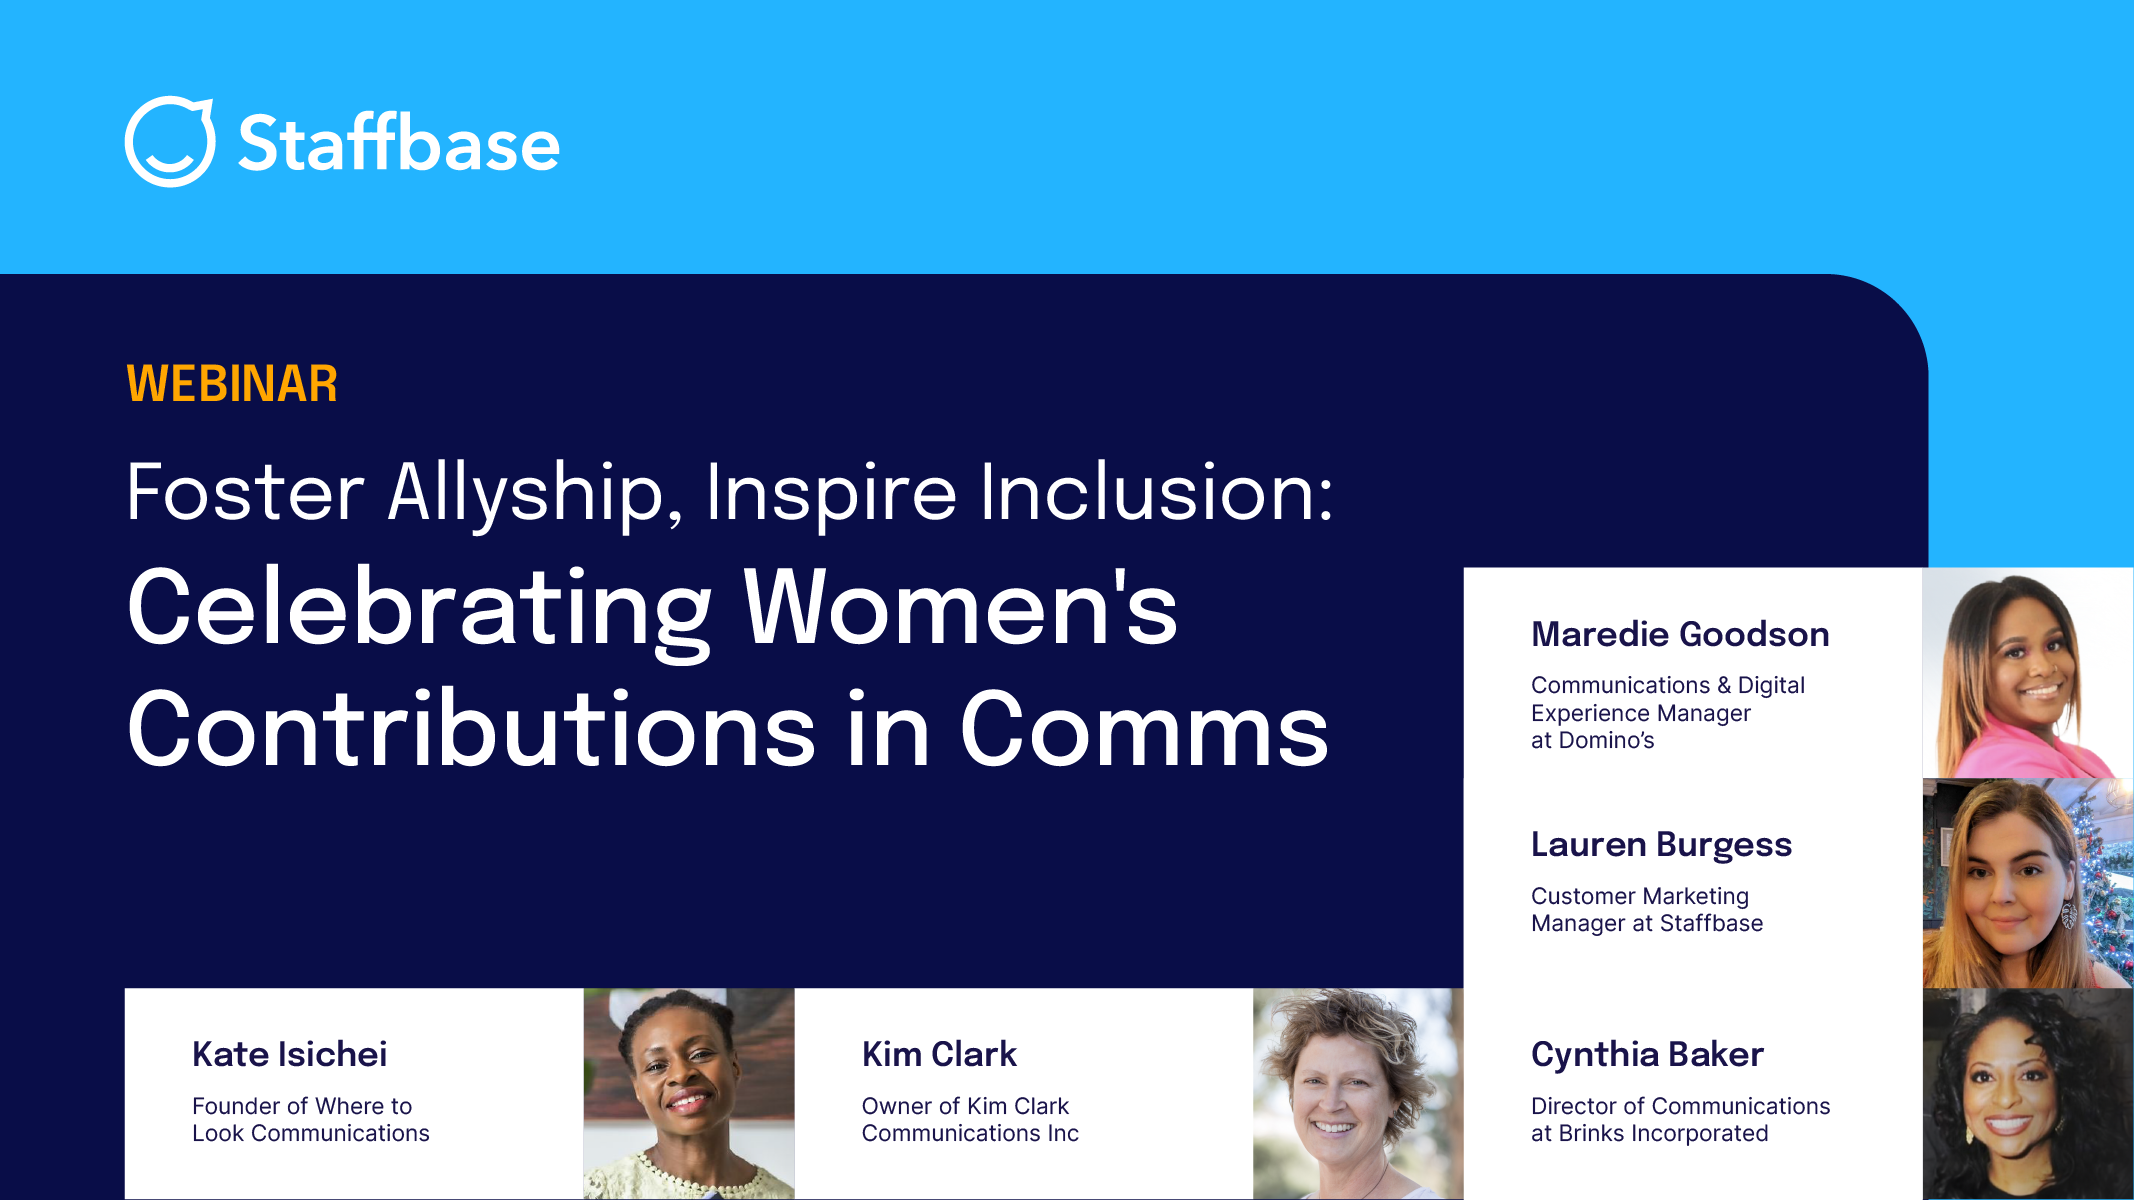 NA Webinar - Foster Allyship, Inspire Inclusion- Celebrating Womens Contributions in Comms 240318 - Asset_Speaker_1280x720px nodate